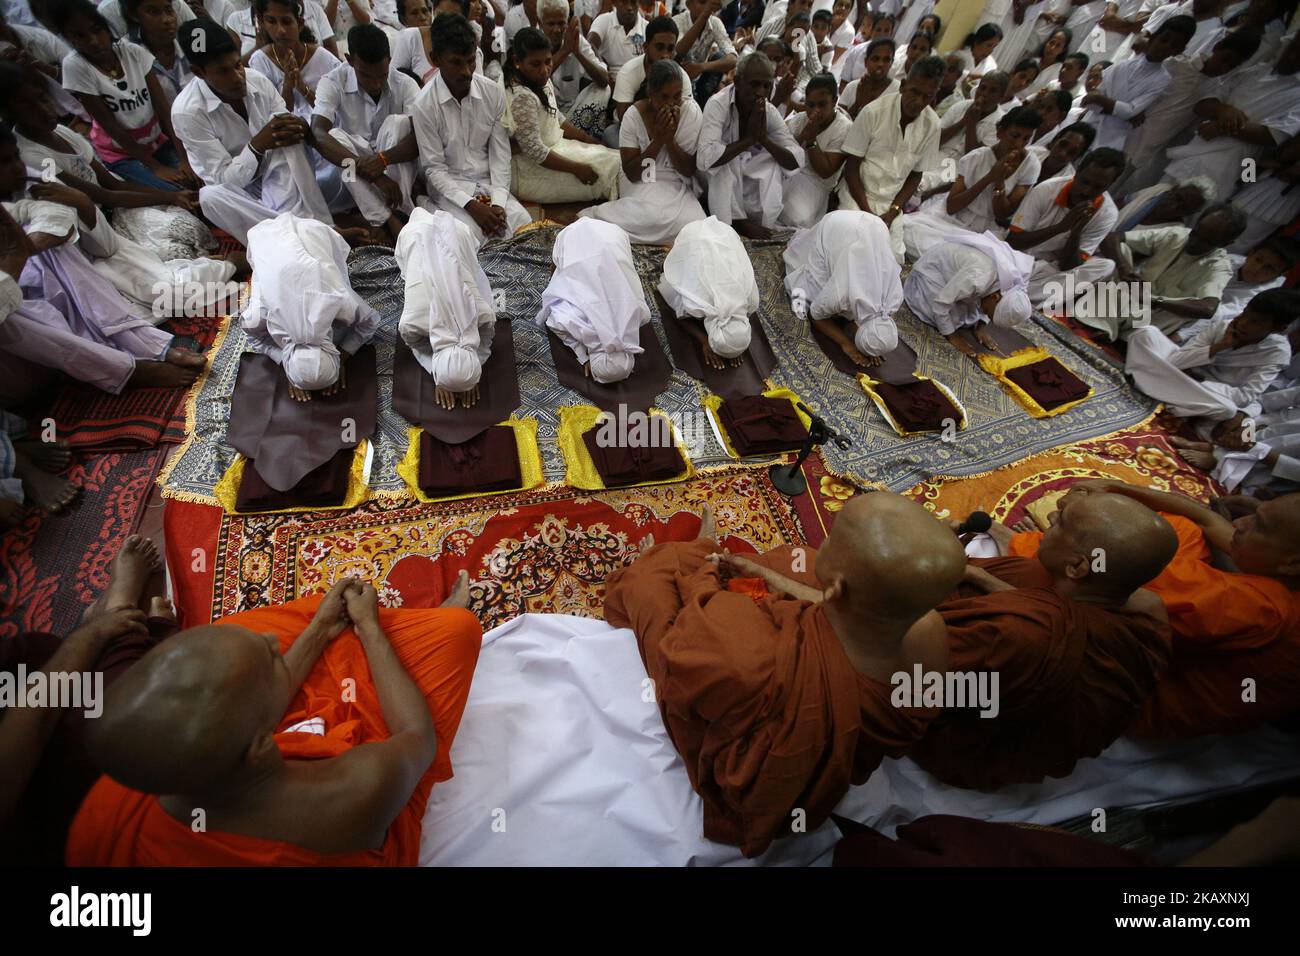 Sri Lankan boys dressed in white cloths worship the Sri Lankan Buddhist monks during a ceremony to be ordained as novice Buddhist monks (samanera) in Colombo, Sri Lanka on Sunday 29 April 2018 which also marks the Vesak full moon poya day Celebrated by Buddhists to mark three momentous events in Lord Buddha's life – his birth, enlightenment, and his departure from the human world. (Photo by Tharaka Basnayaka/NurPhoto) Stock Photo